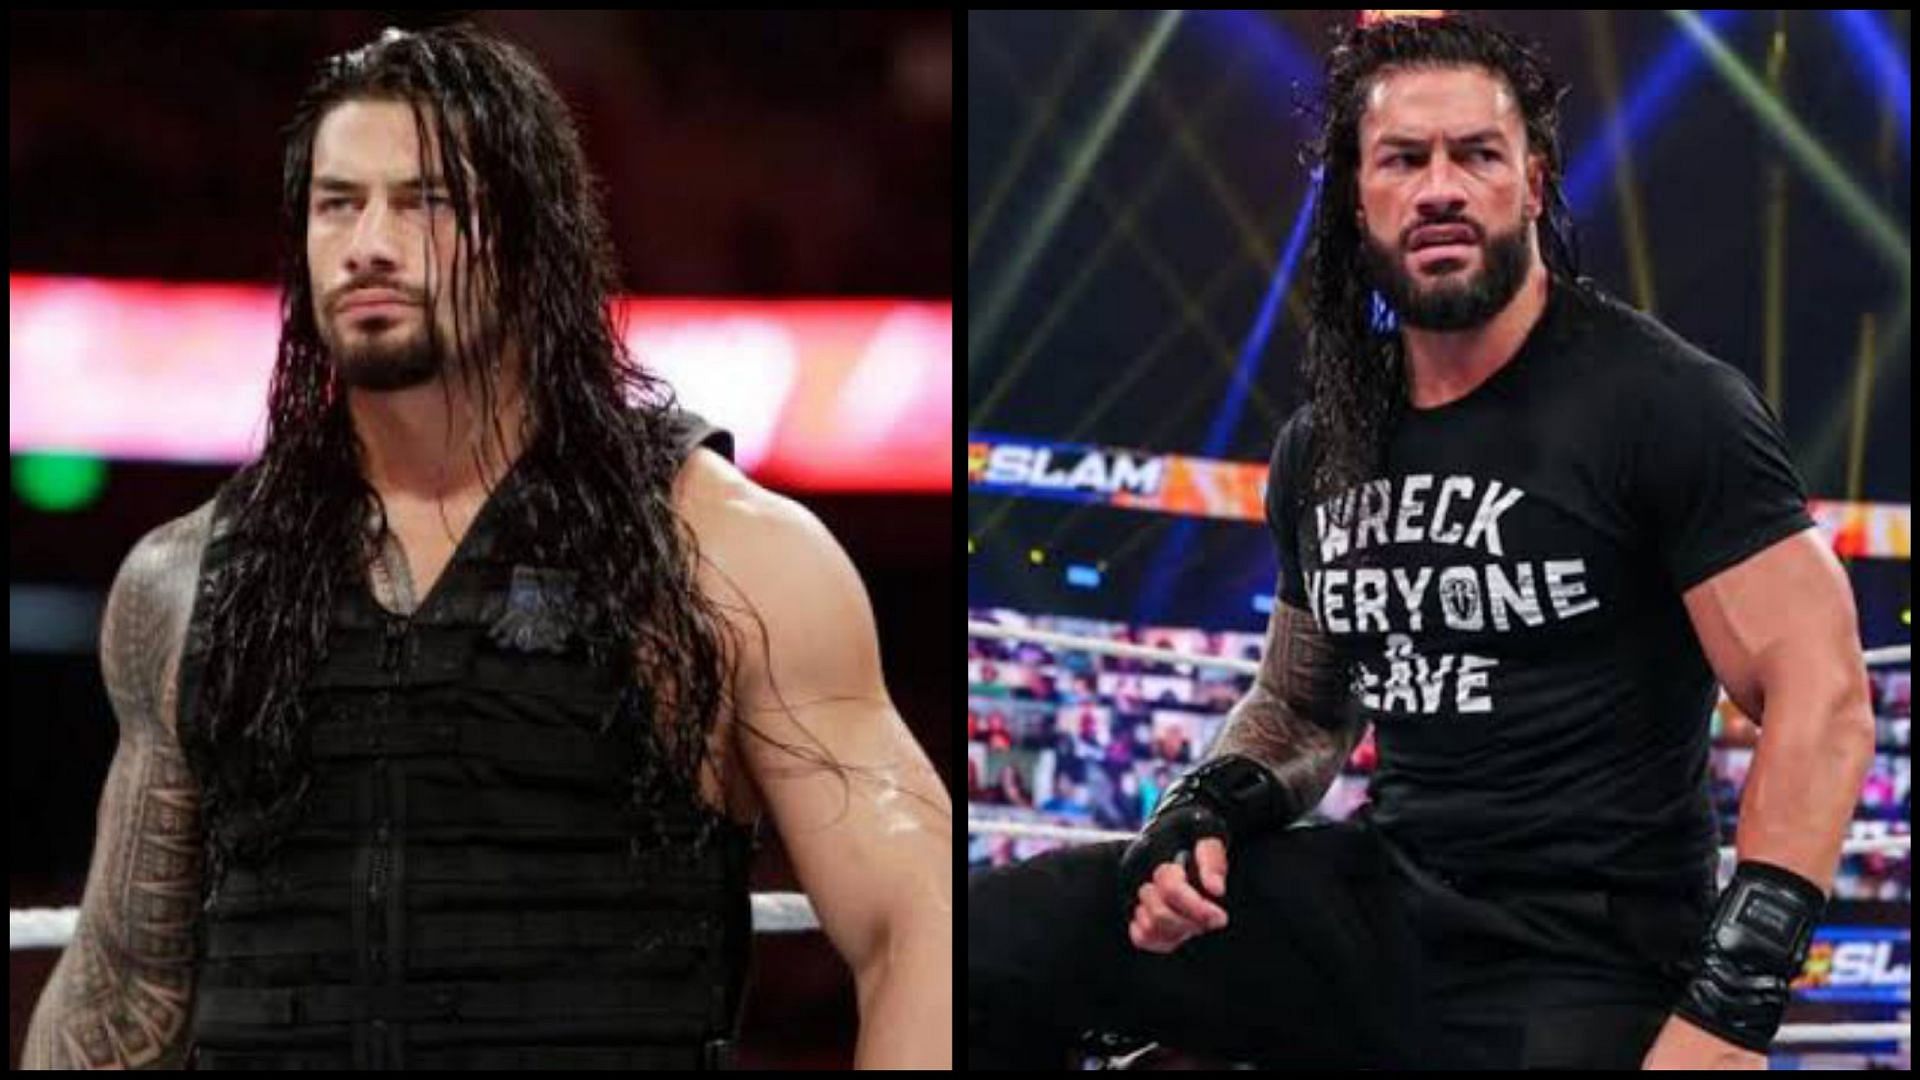 Roman Reigns has been on the top of his game ever since turning heel.